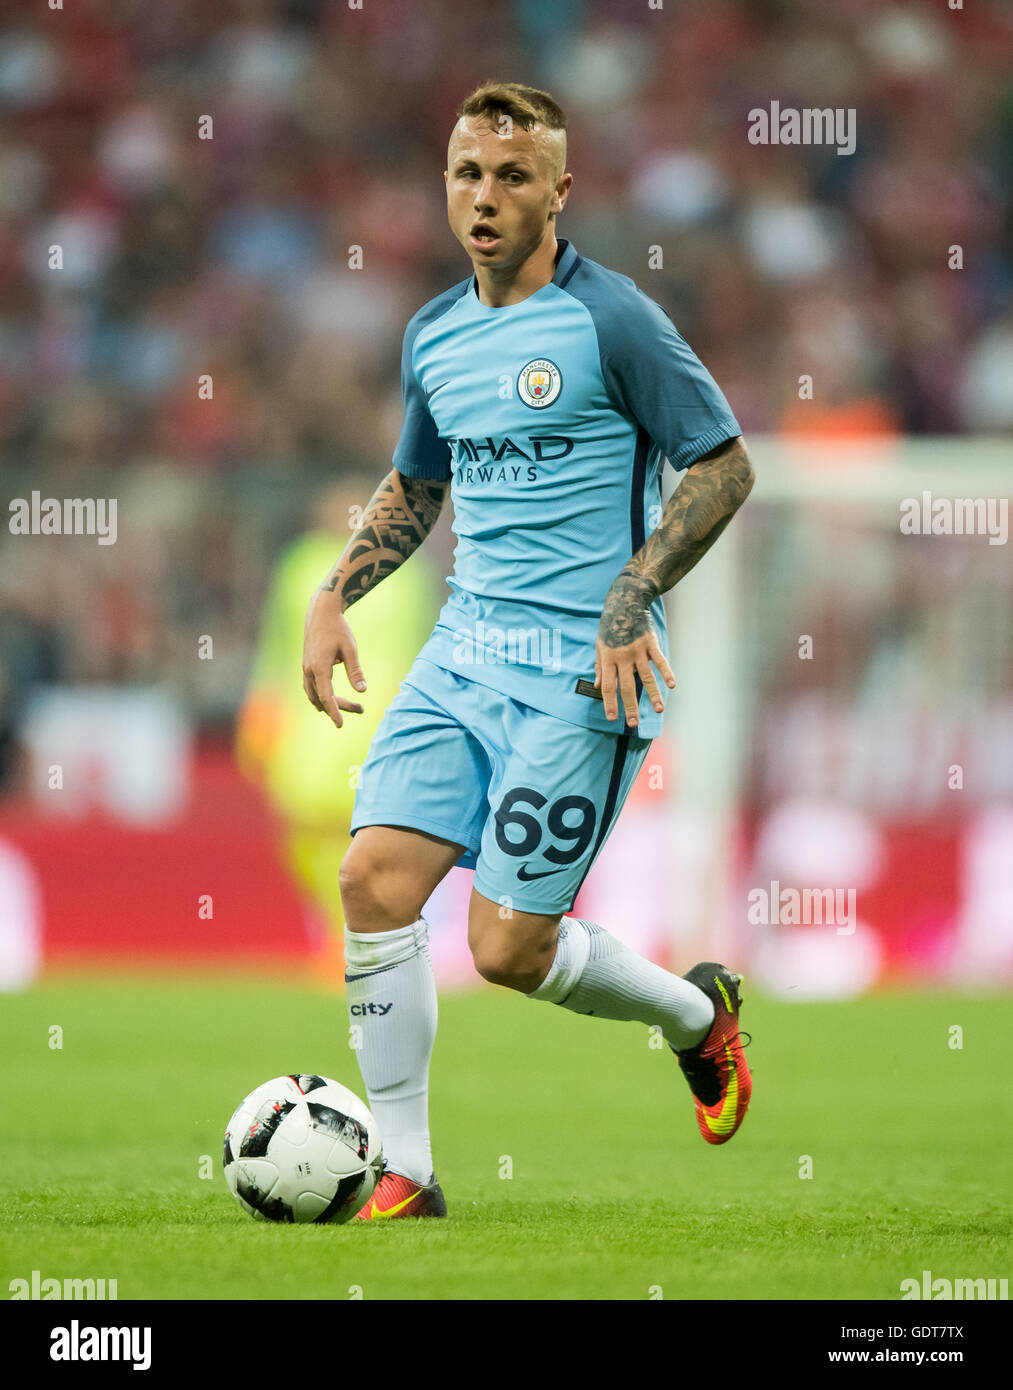 Munich, Germany. 20th July, 2016. Manchester's Angelino (Jose Angel Esmoris Tasende) in action during an international soccer friendly match between FC Bayern Munich and Manchester City at the Allianz Arena in Munich, Germany, 20 July 2016. Photo: THOMAS EISENHUTH/dpa - NO WIRE SERVICE -/dpa/Alamy Live News Stock Photo